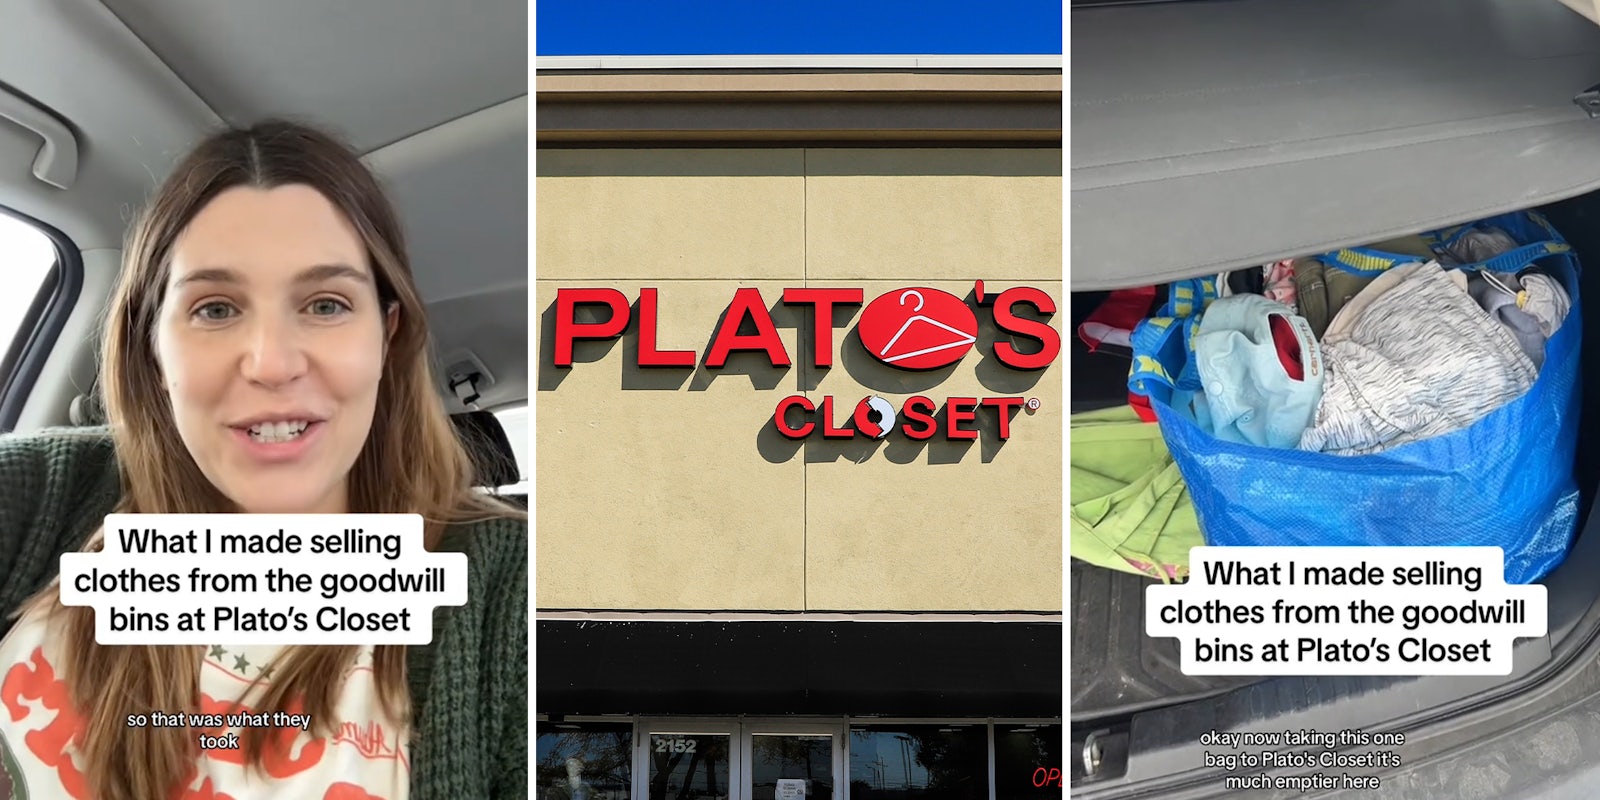 Viewers divided after woman resells clothes from Goodwill bins to Plato’s Closet